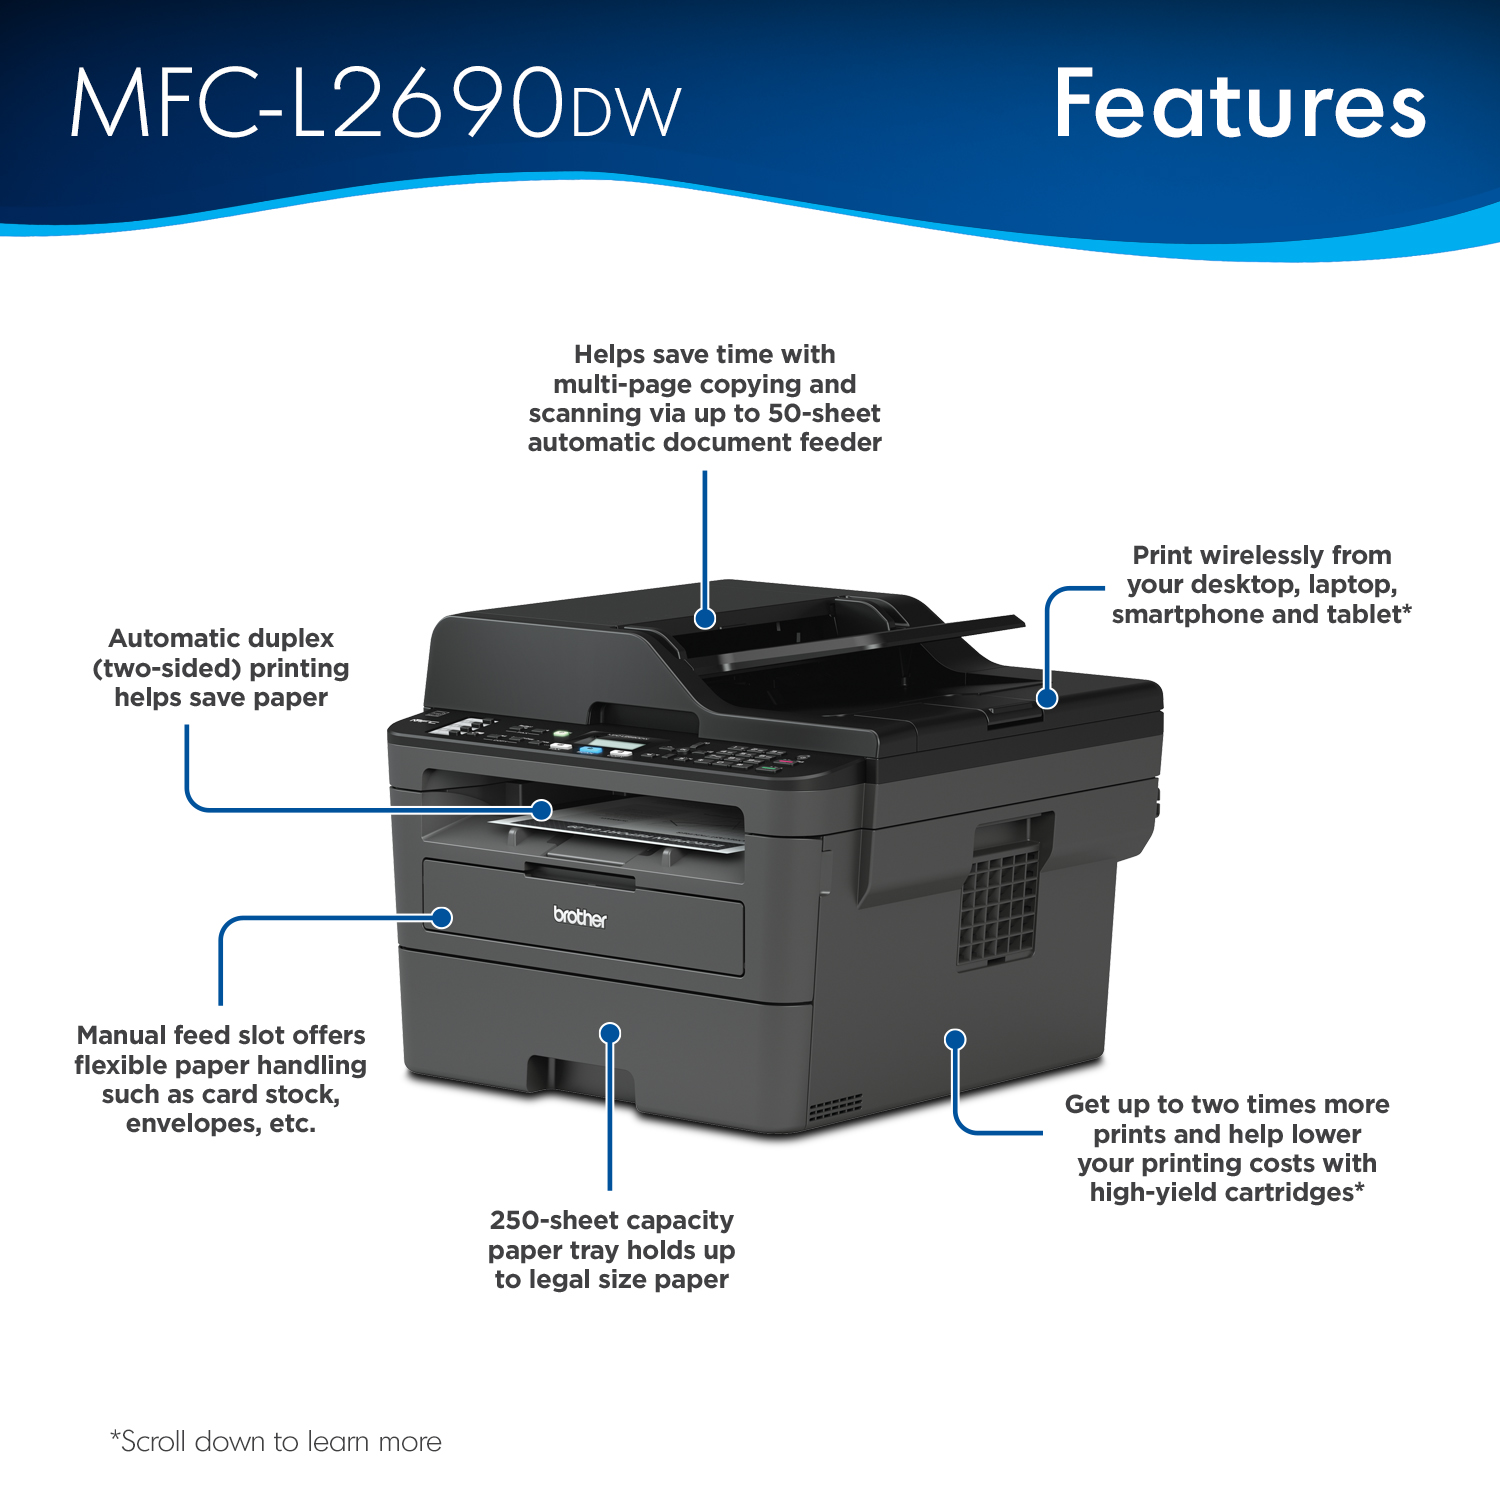 Brother MFC-L2690DW Monochrome Laser All-in-One Printer, Duplex Printing, Wireless Connectivity - image 3 of 10